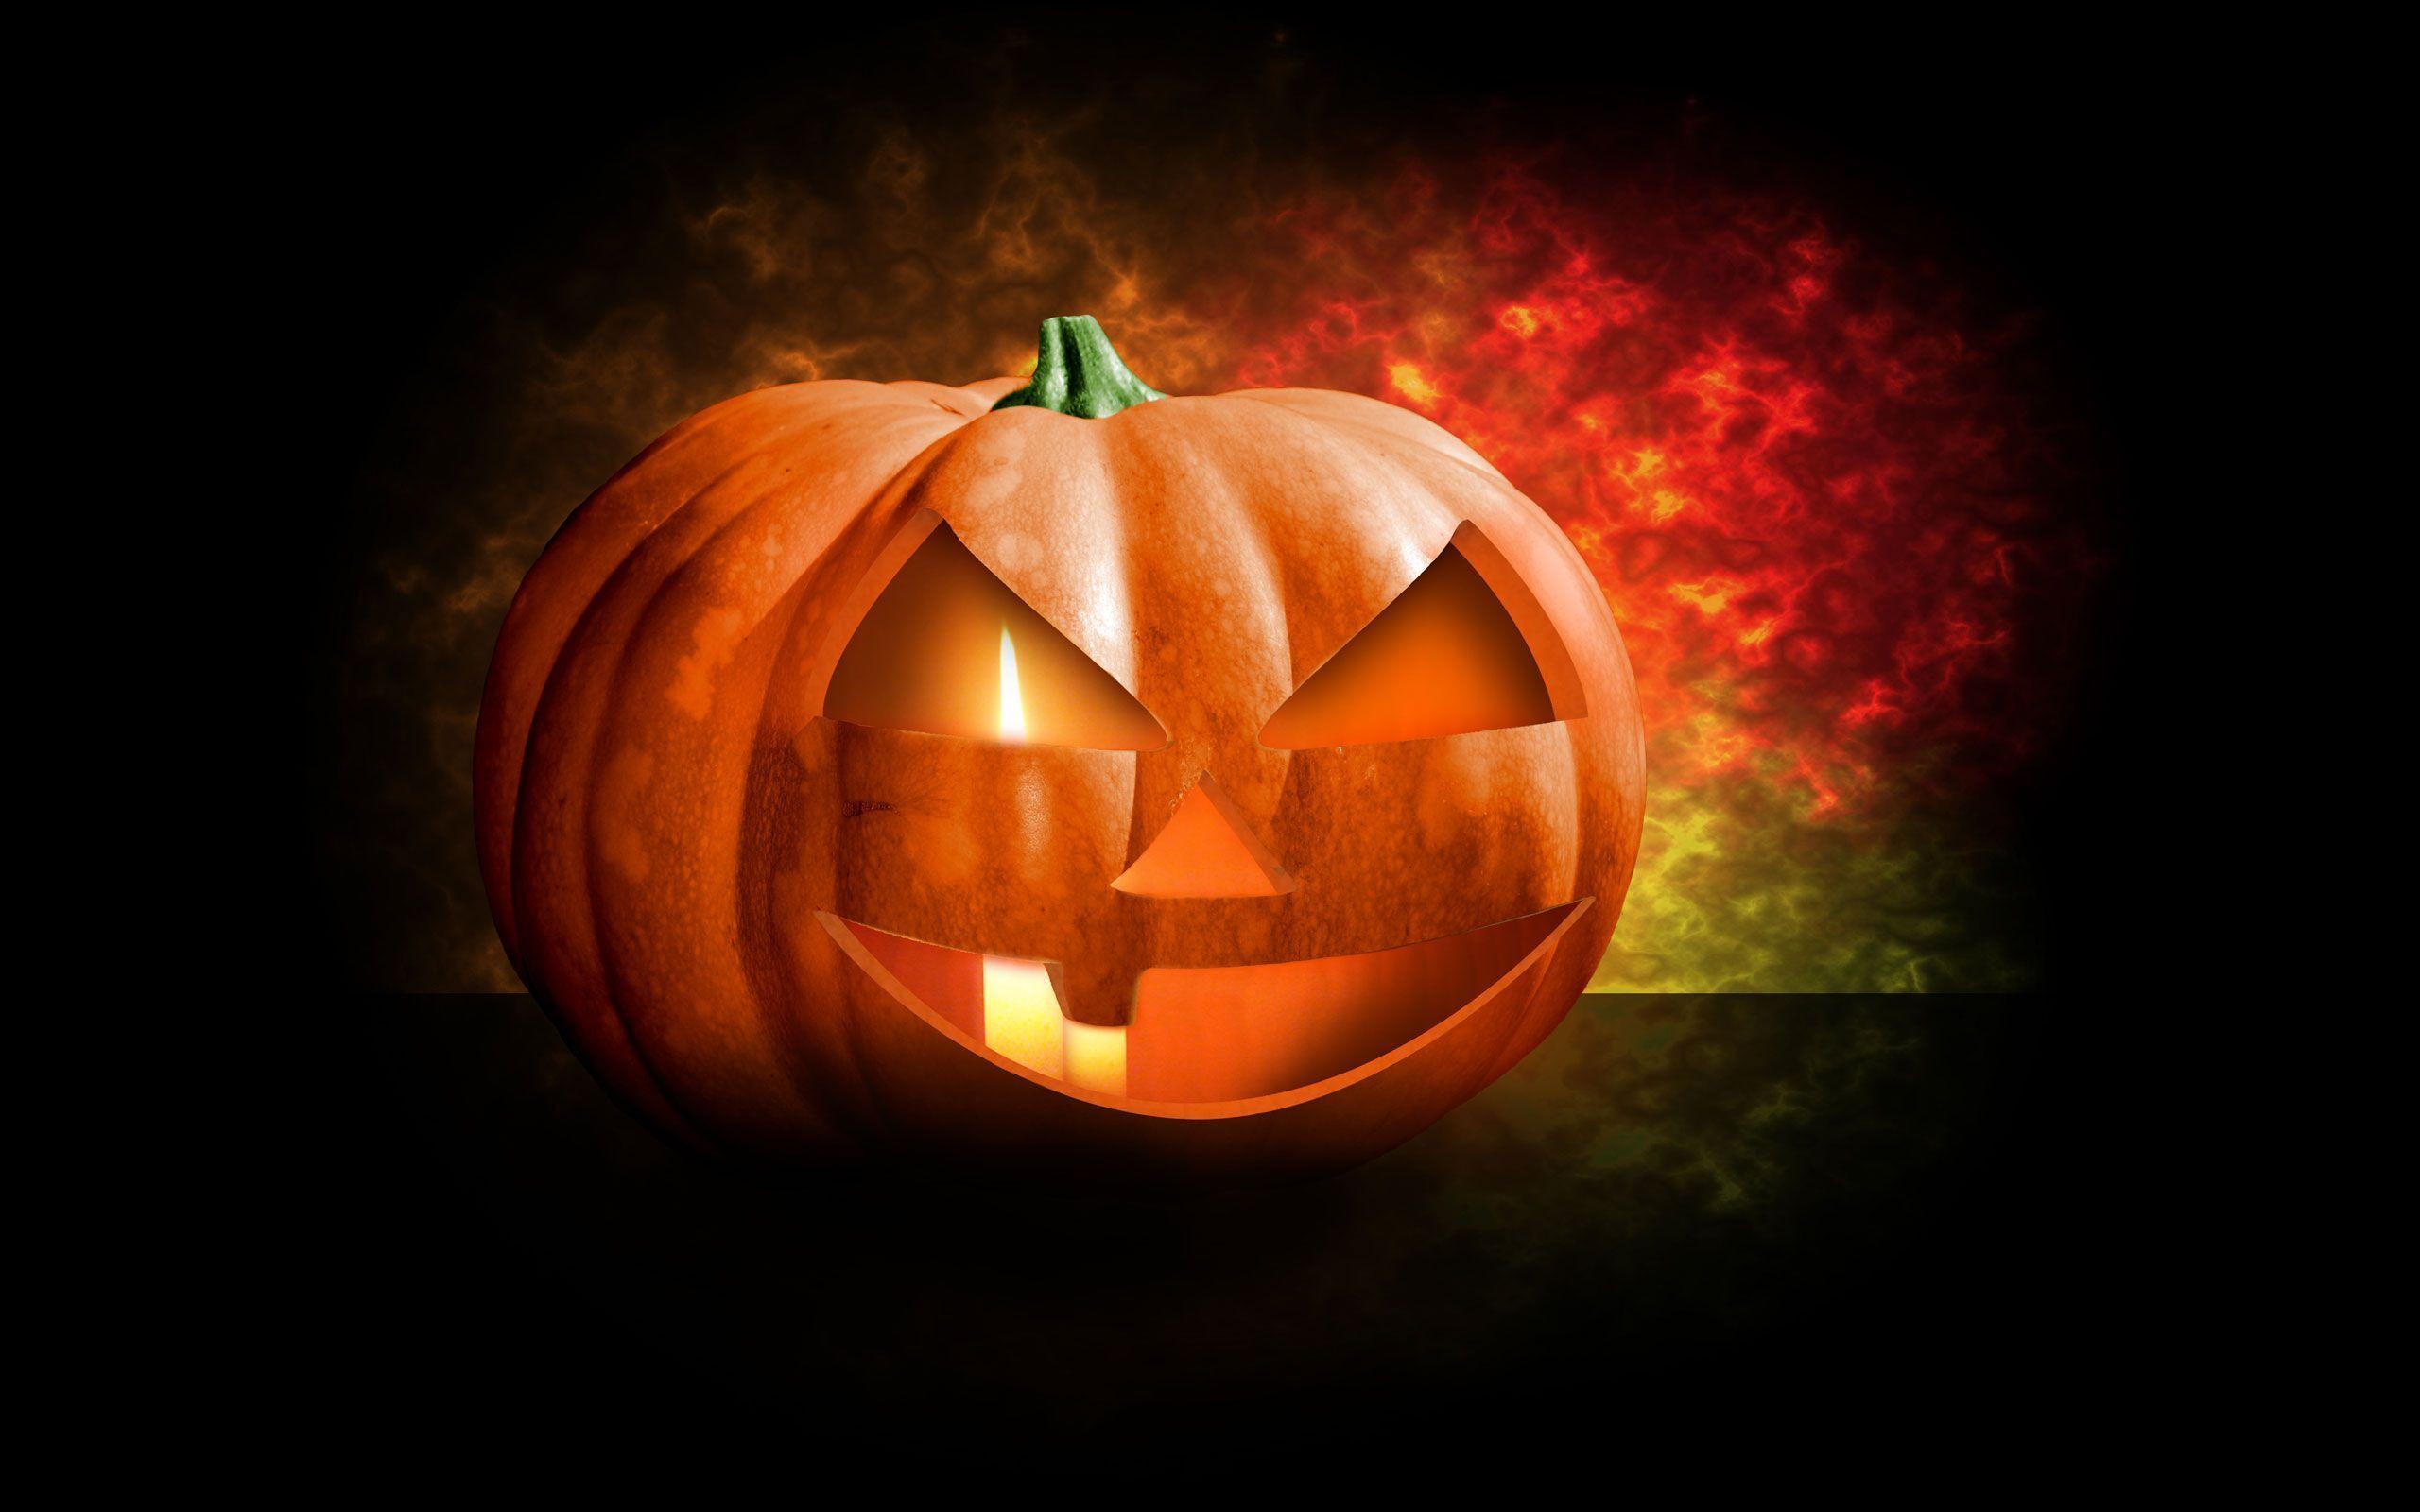 Free Wallpaper Pumpkin With Candle 2560x1600 wallpaper